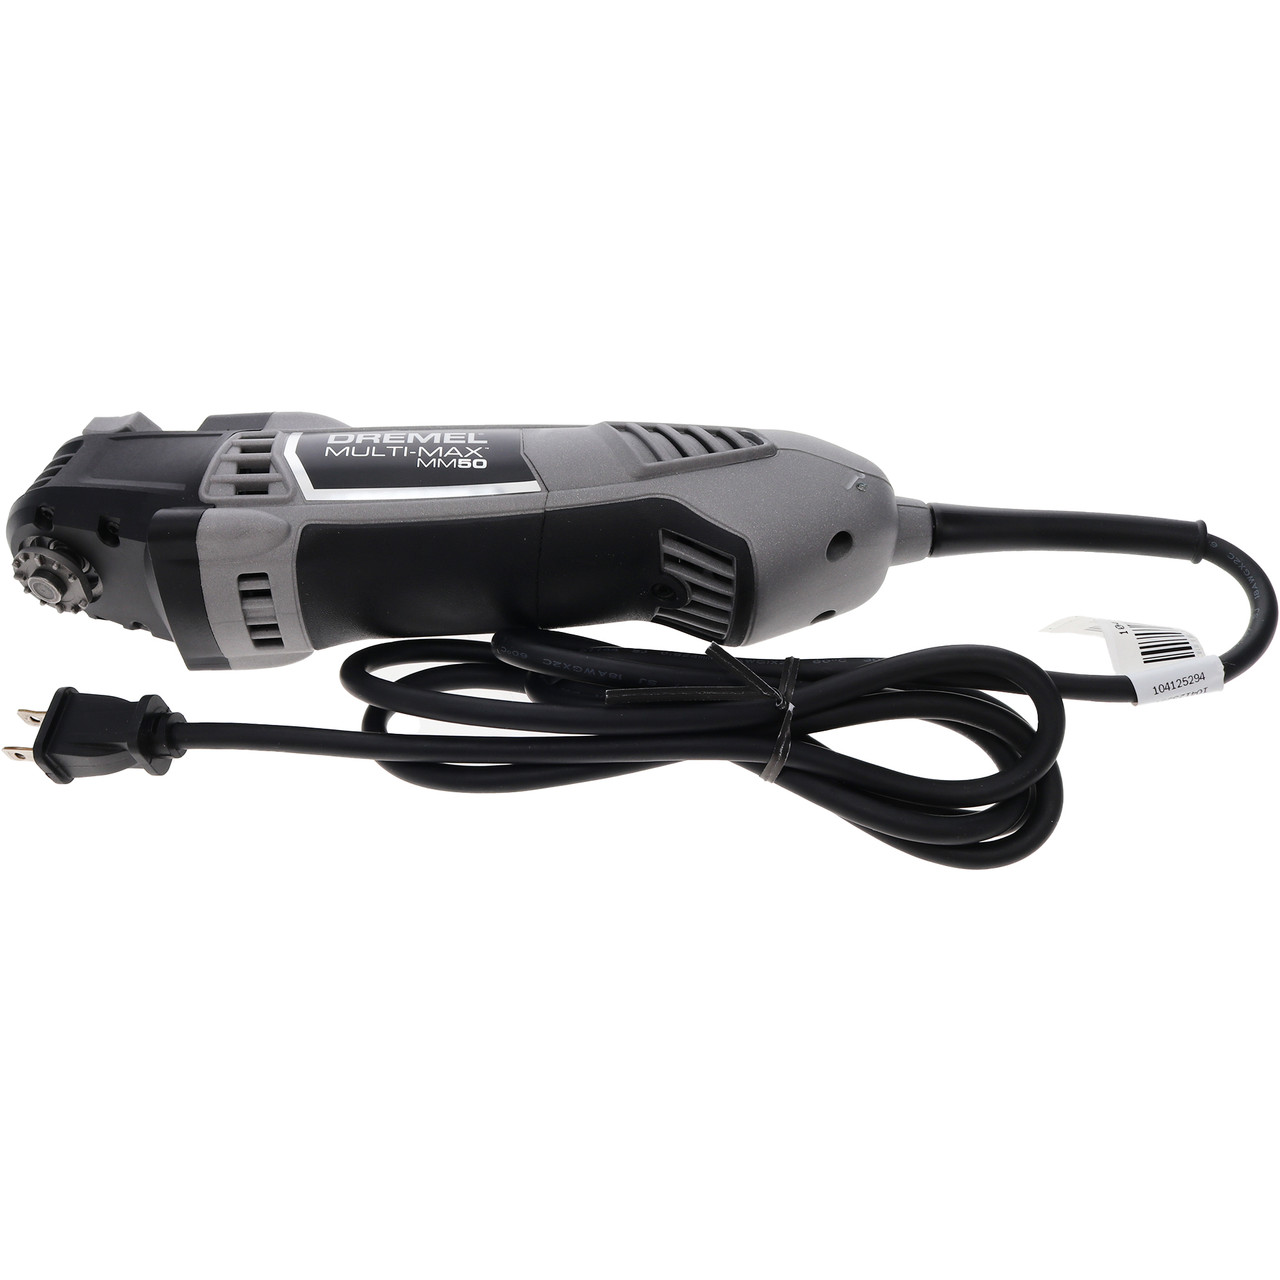 Dremel 120V 5 Amp Corded Multi-Max Oscillating Multi Tool with Accessories (RECON) | Helton Tool & Home